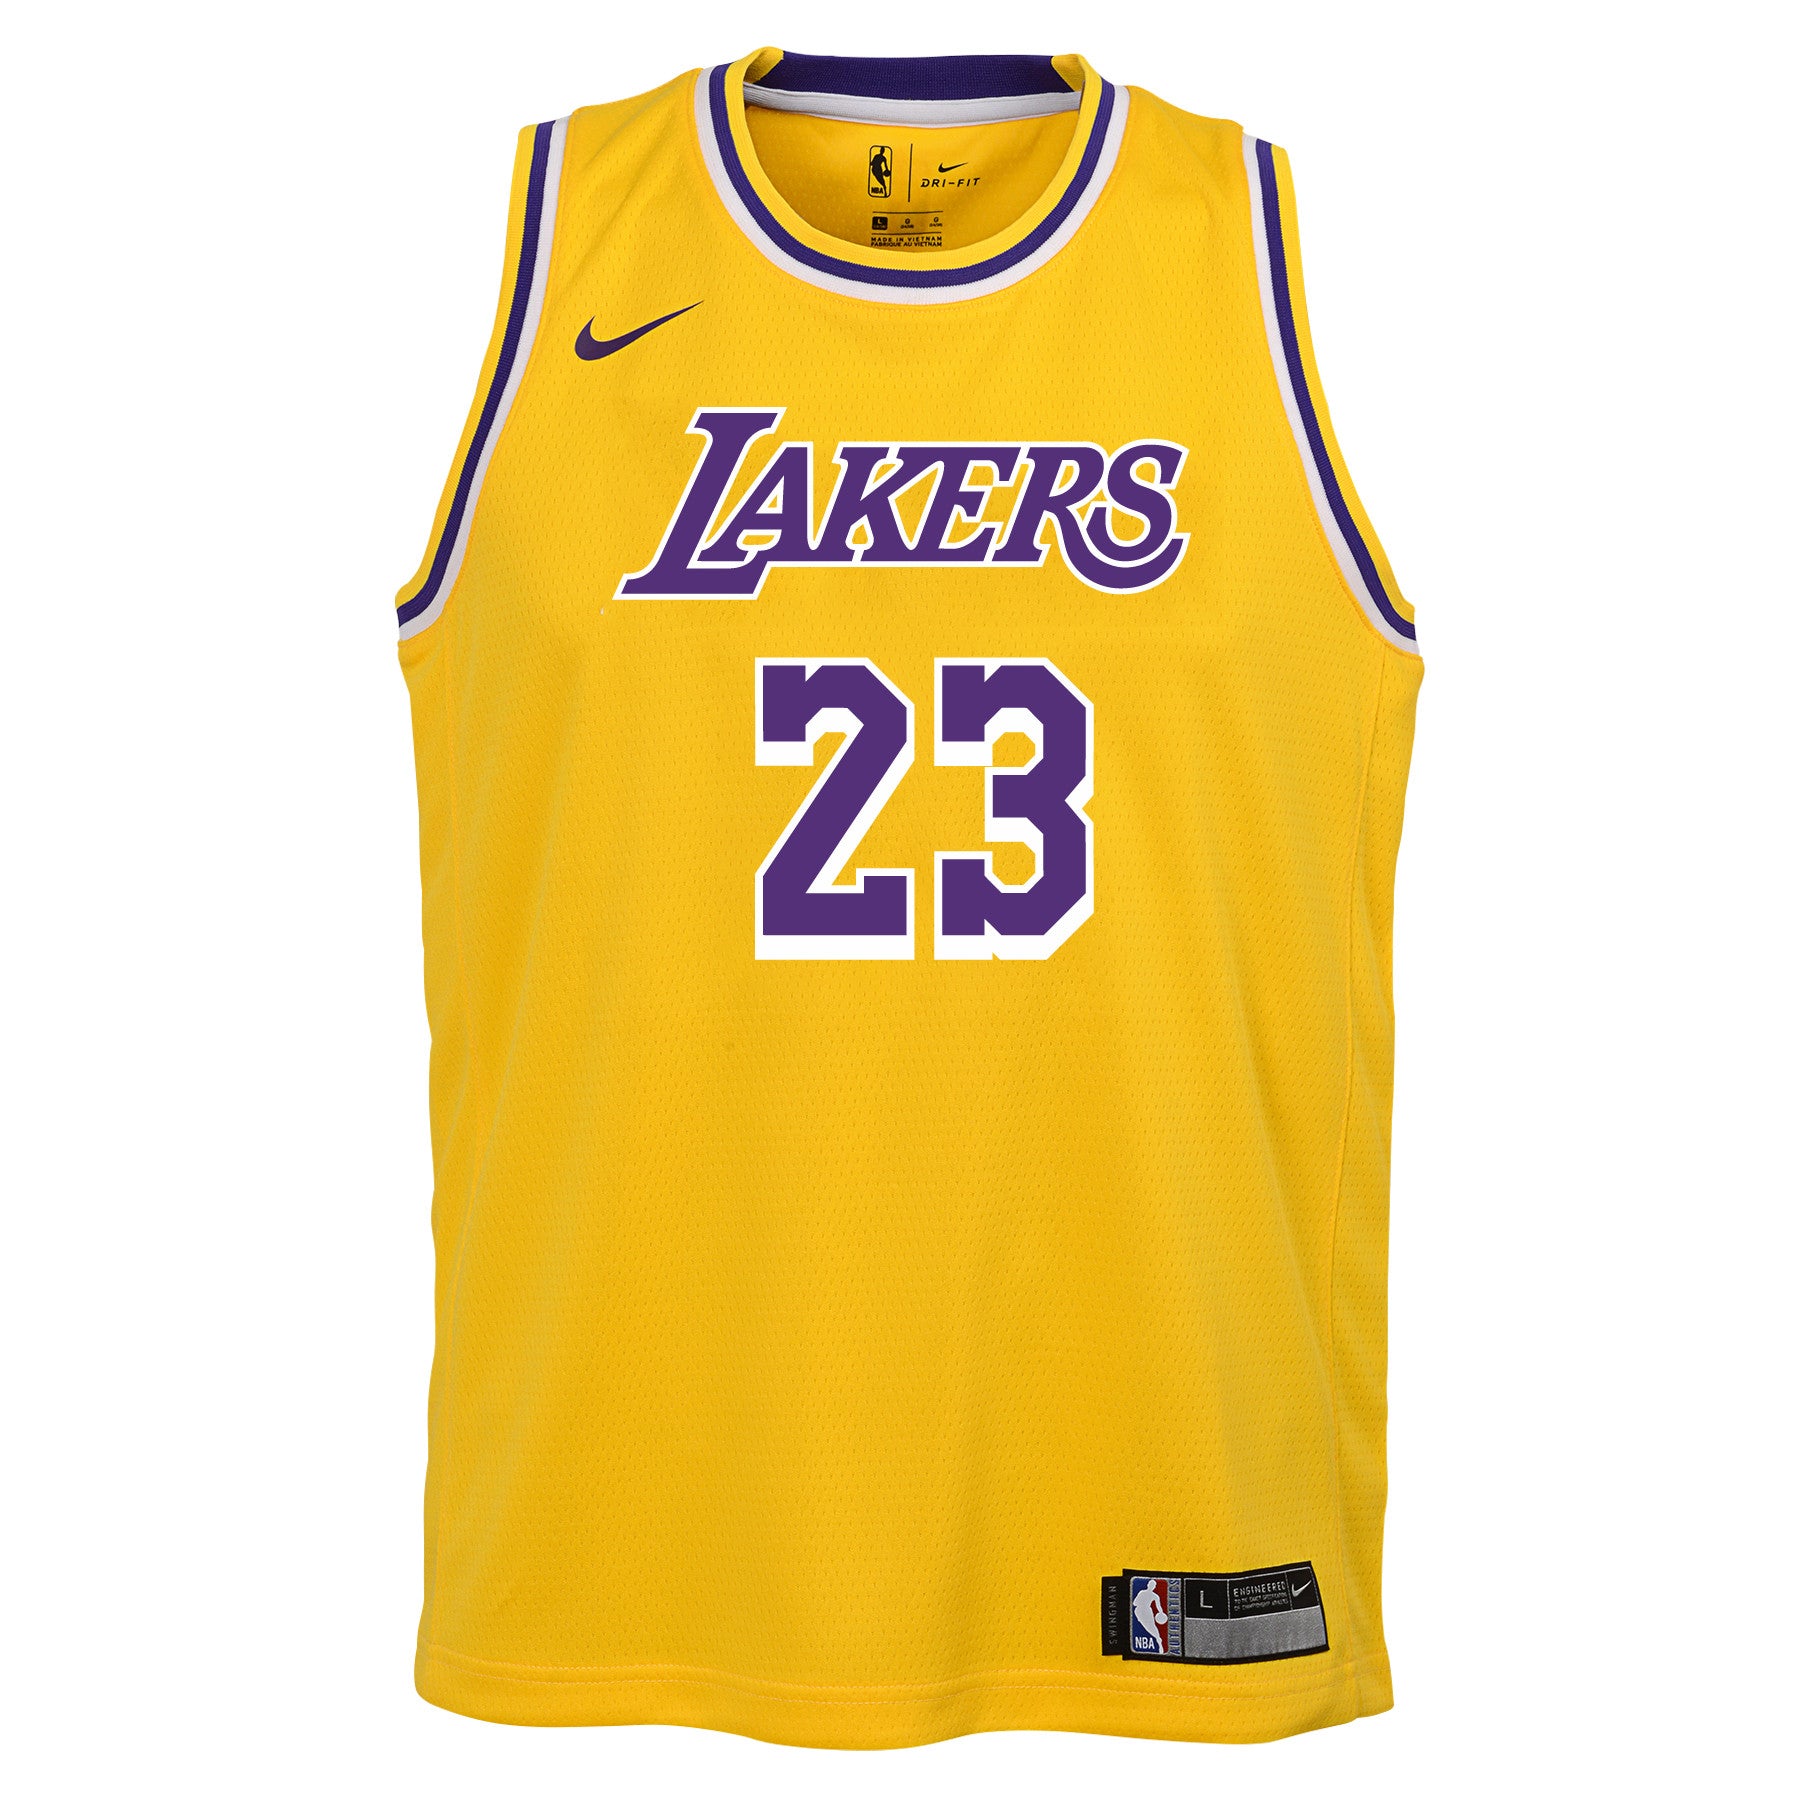 23 Lakers Jersey Top Sellers, UP TO 62% OFF